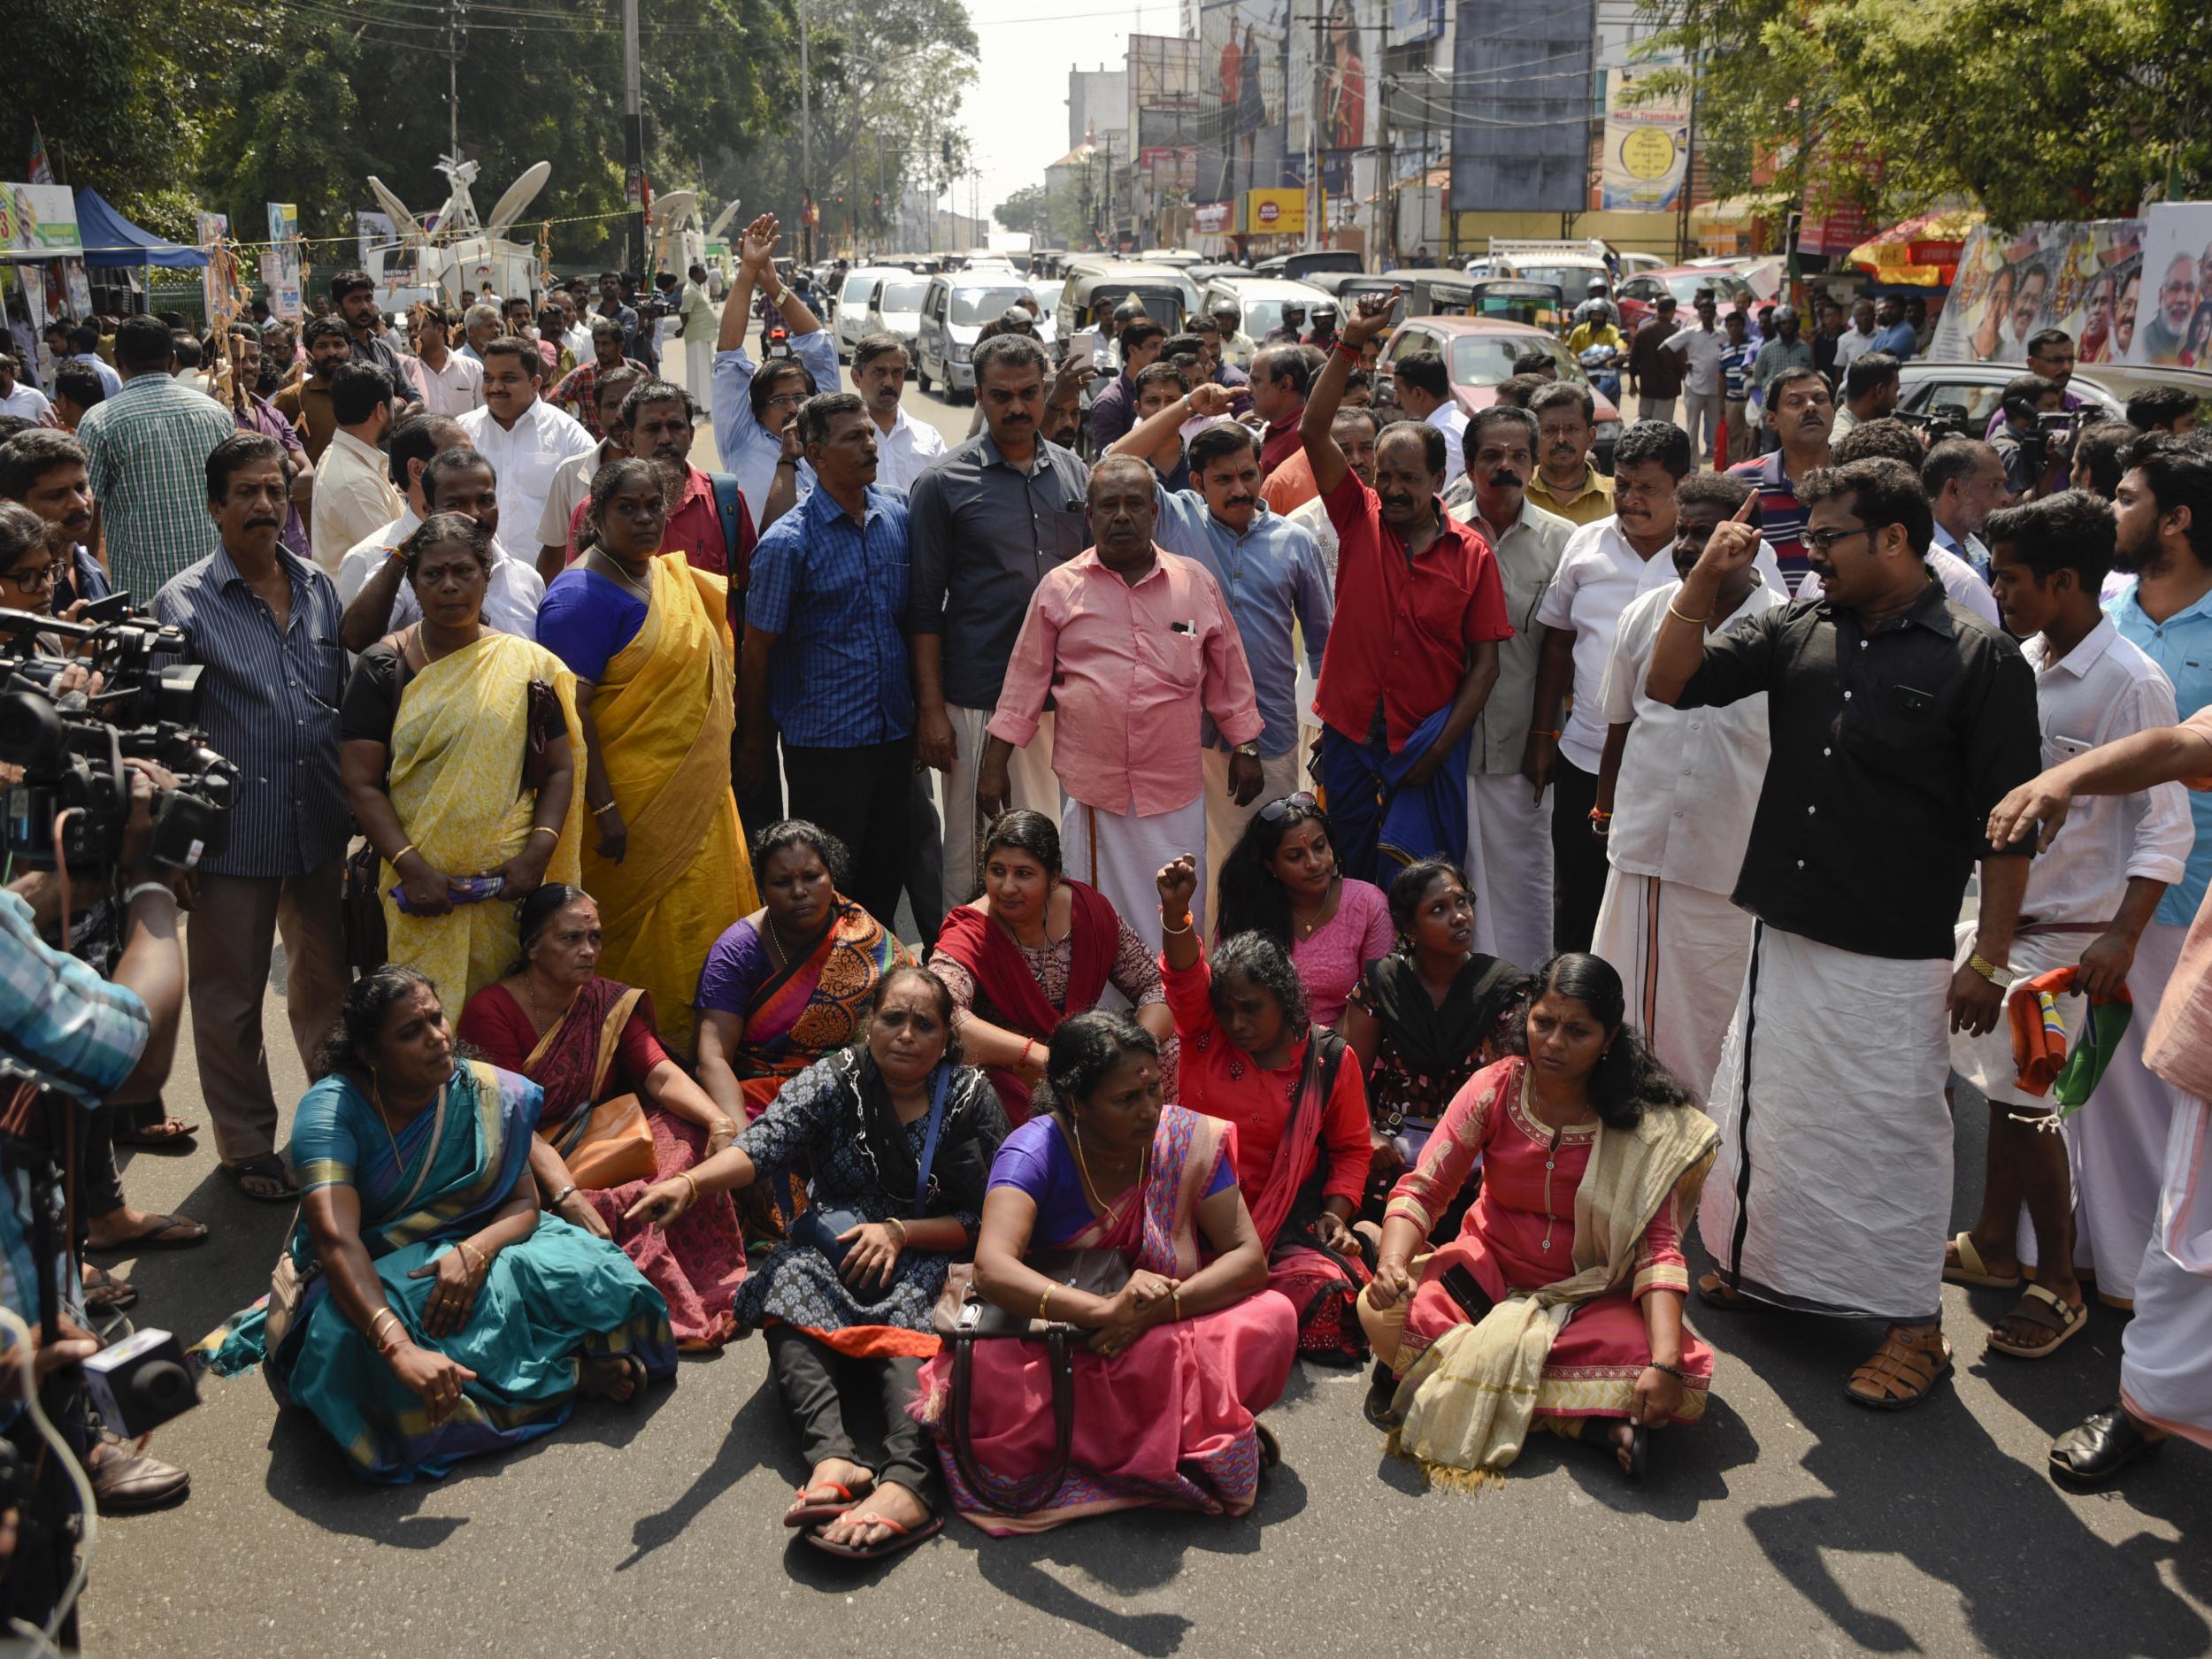 Protestors block traffic and shout slogans after hearing reports of the two women entering the Sabarimala temple